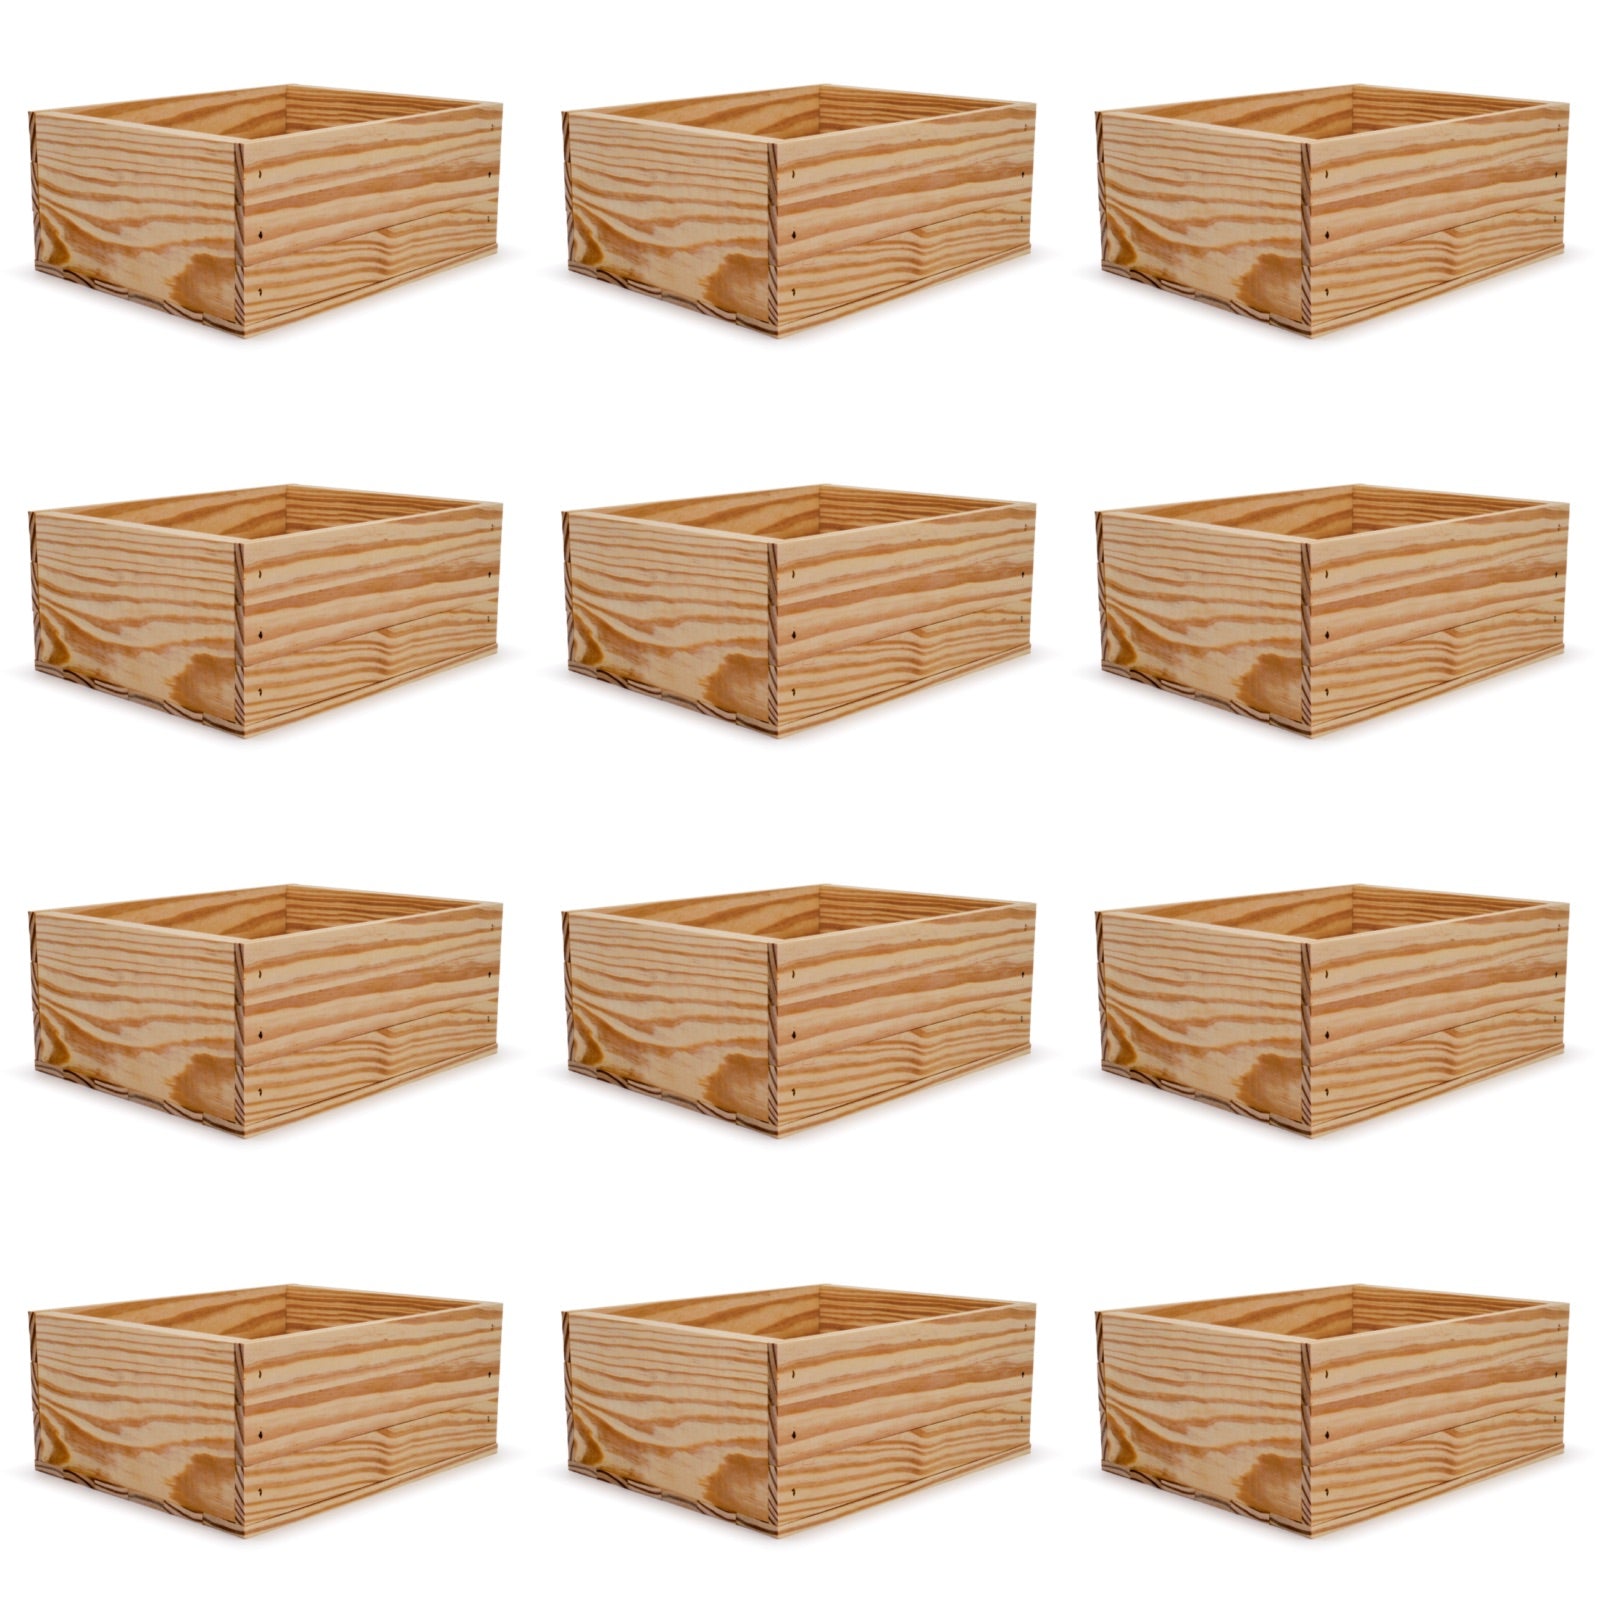 12 Small wooden crates 12x9.75x5.25